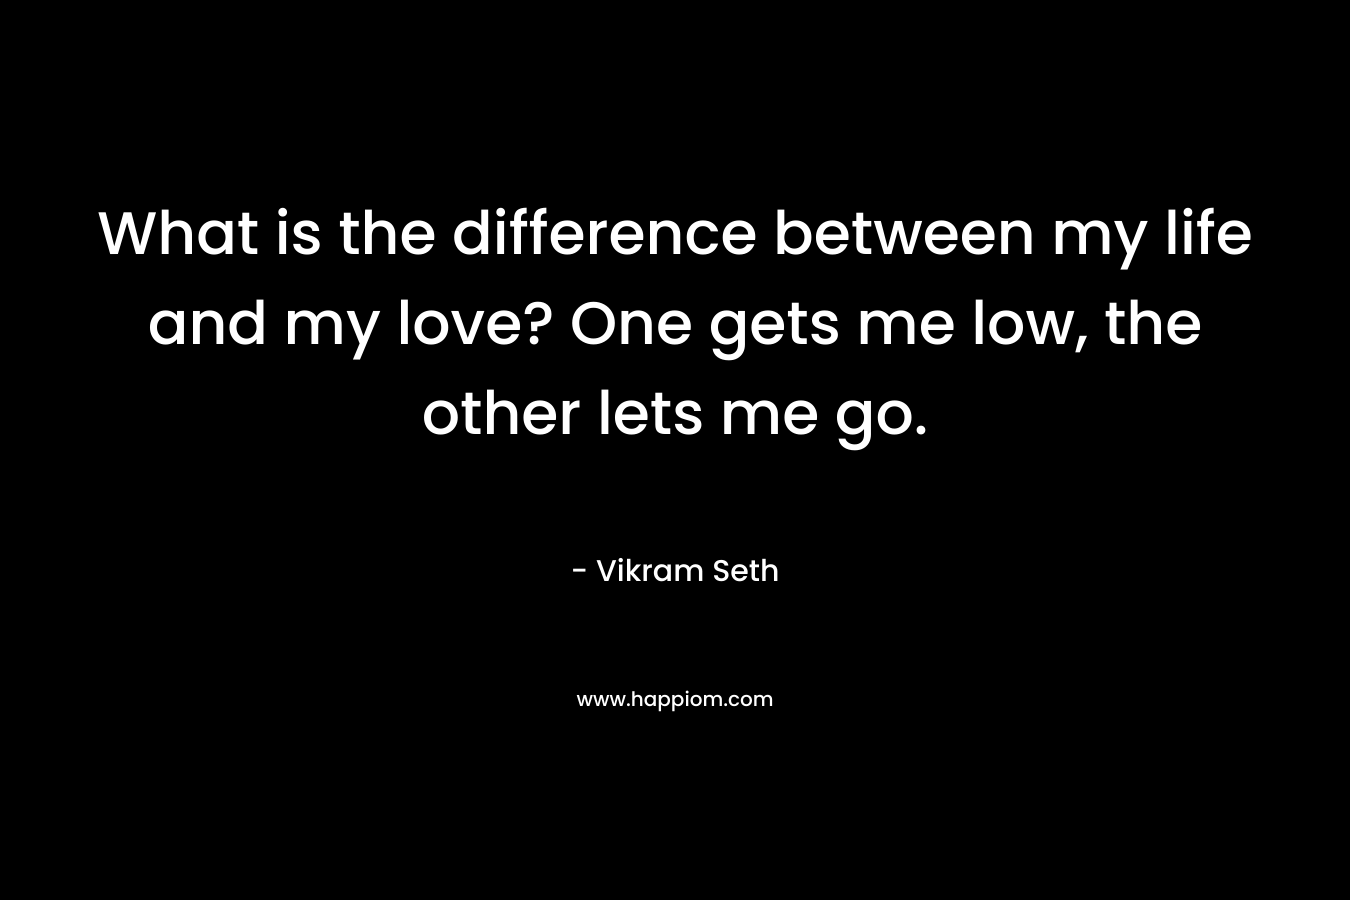 What is the difference between my life and my love? One gets me low, the other lets me go. – Vikram Seth